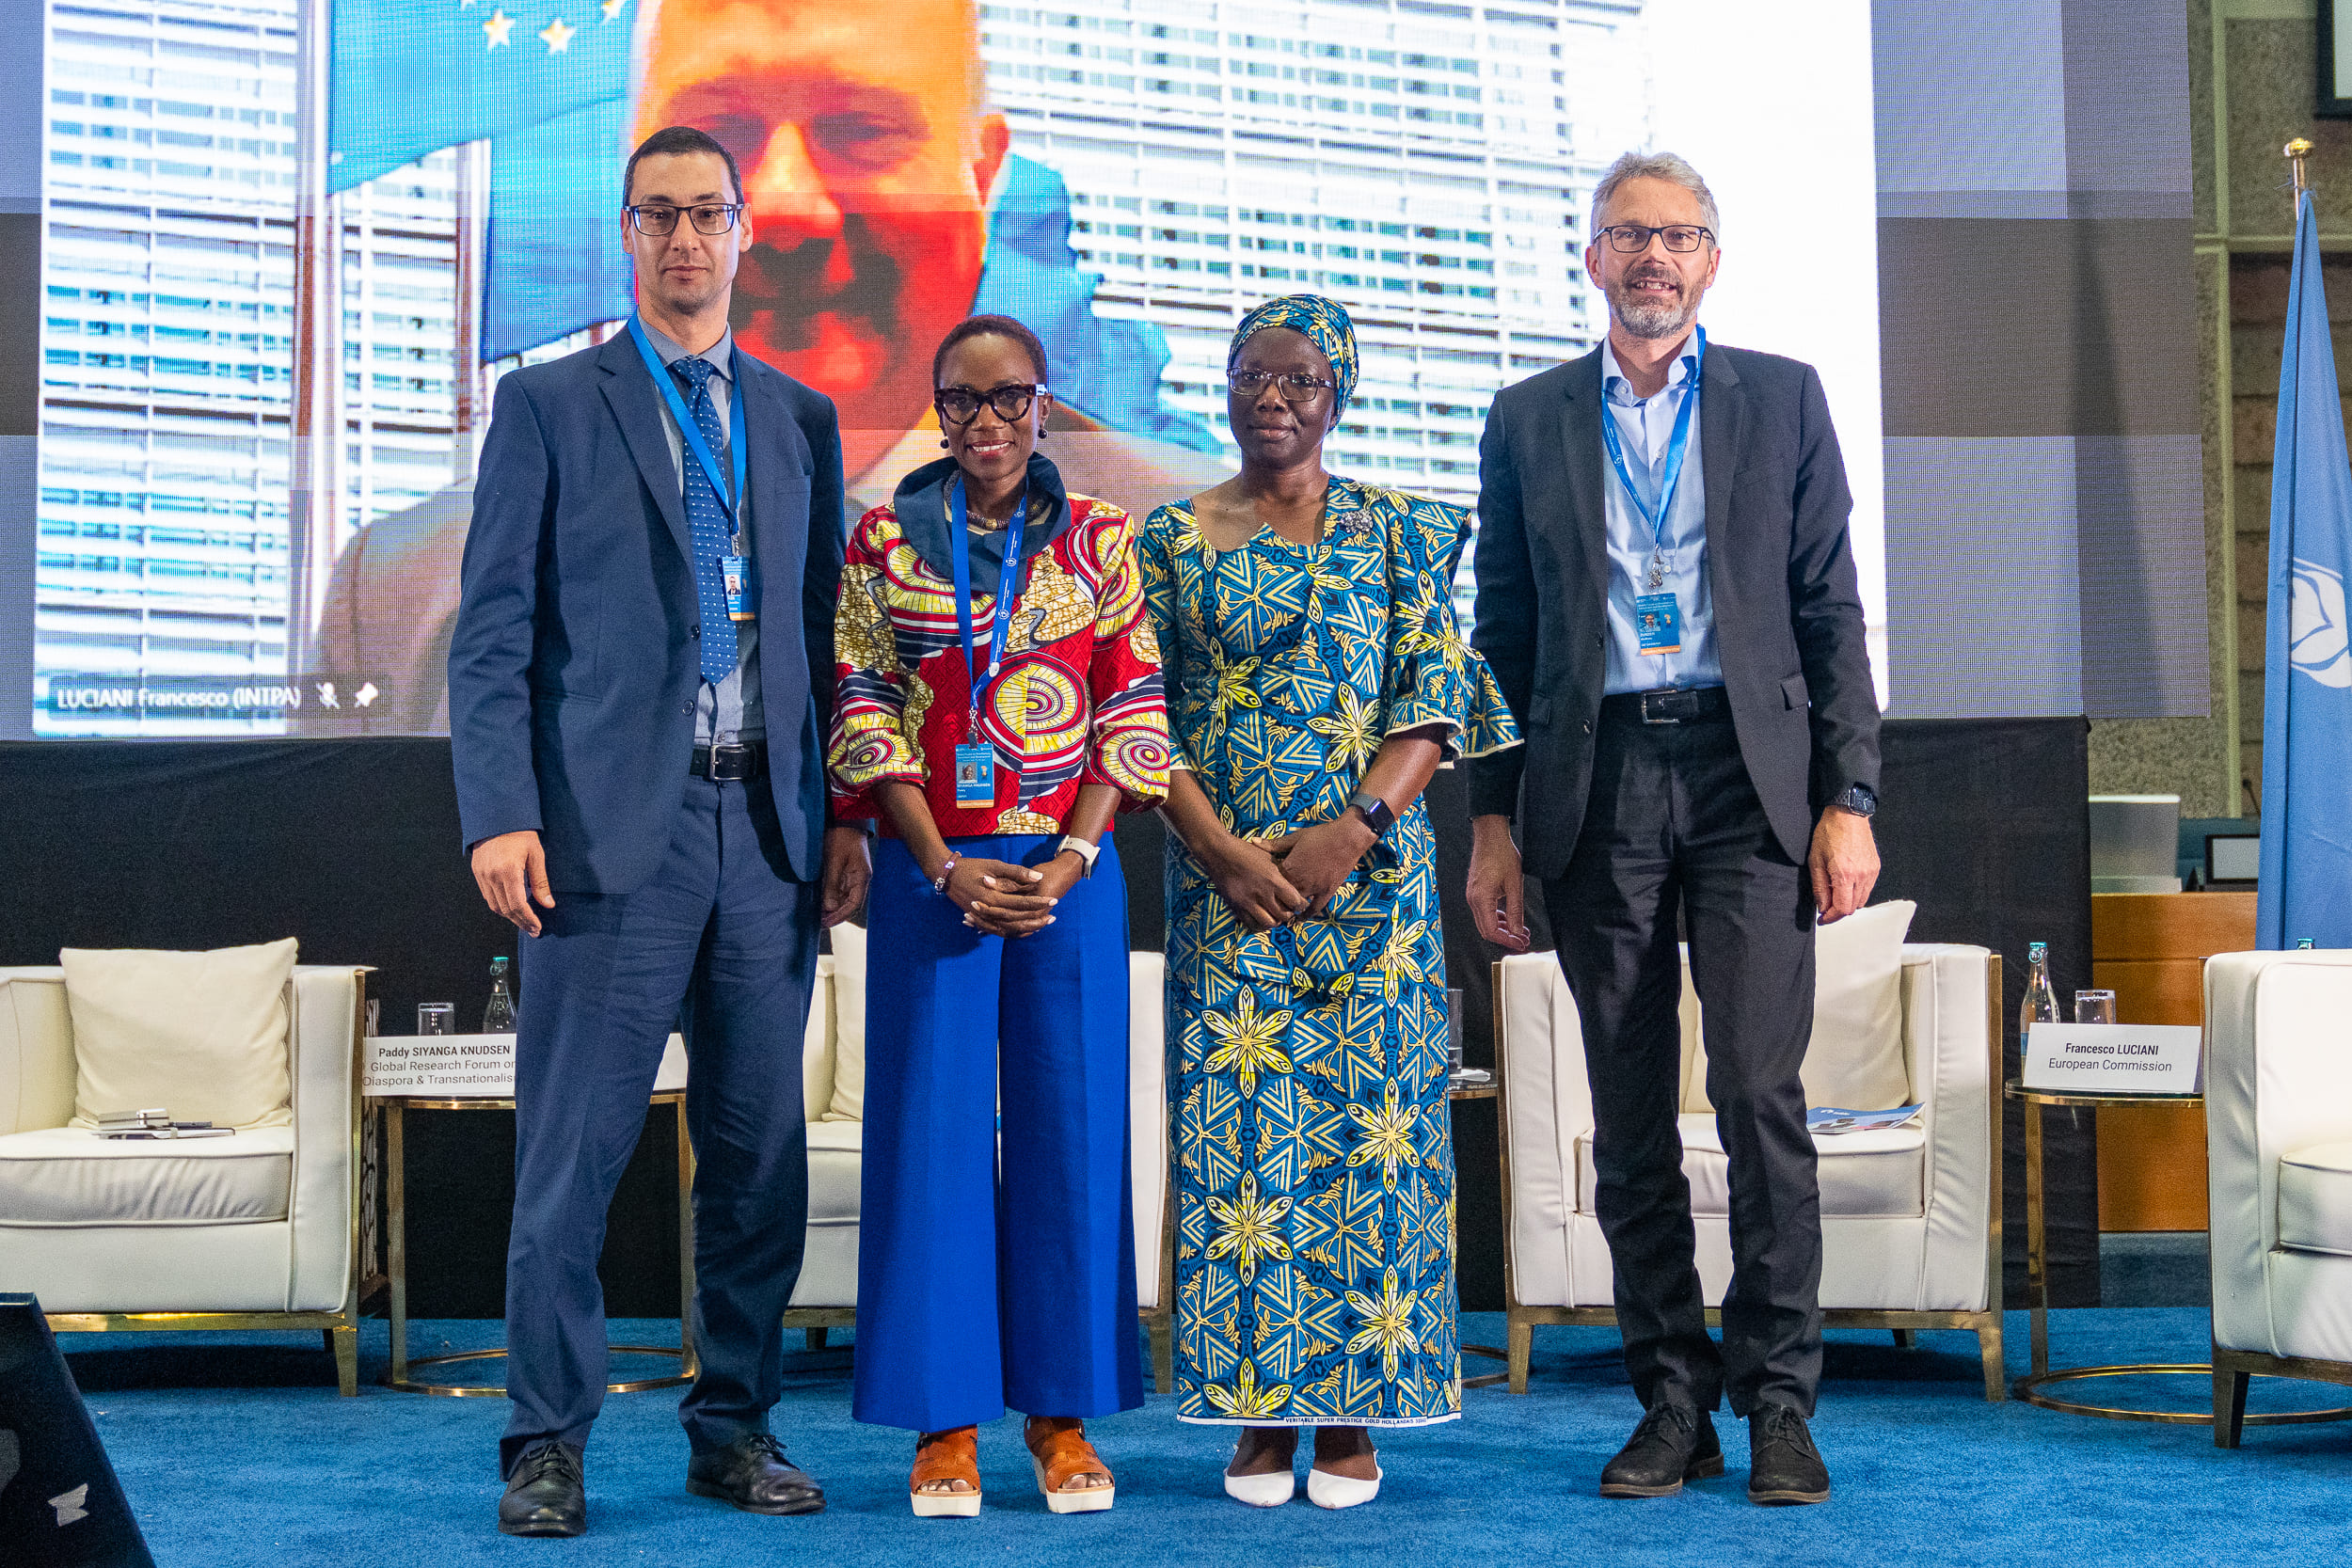 GIZ WIDU.africa project lead participated in panel discussion at Global Forum on Remittances, Investment, and Development Summit 2023 (GRFID)